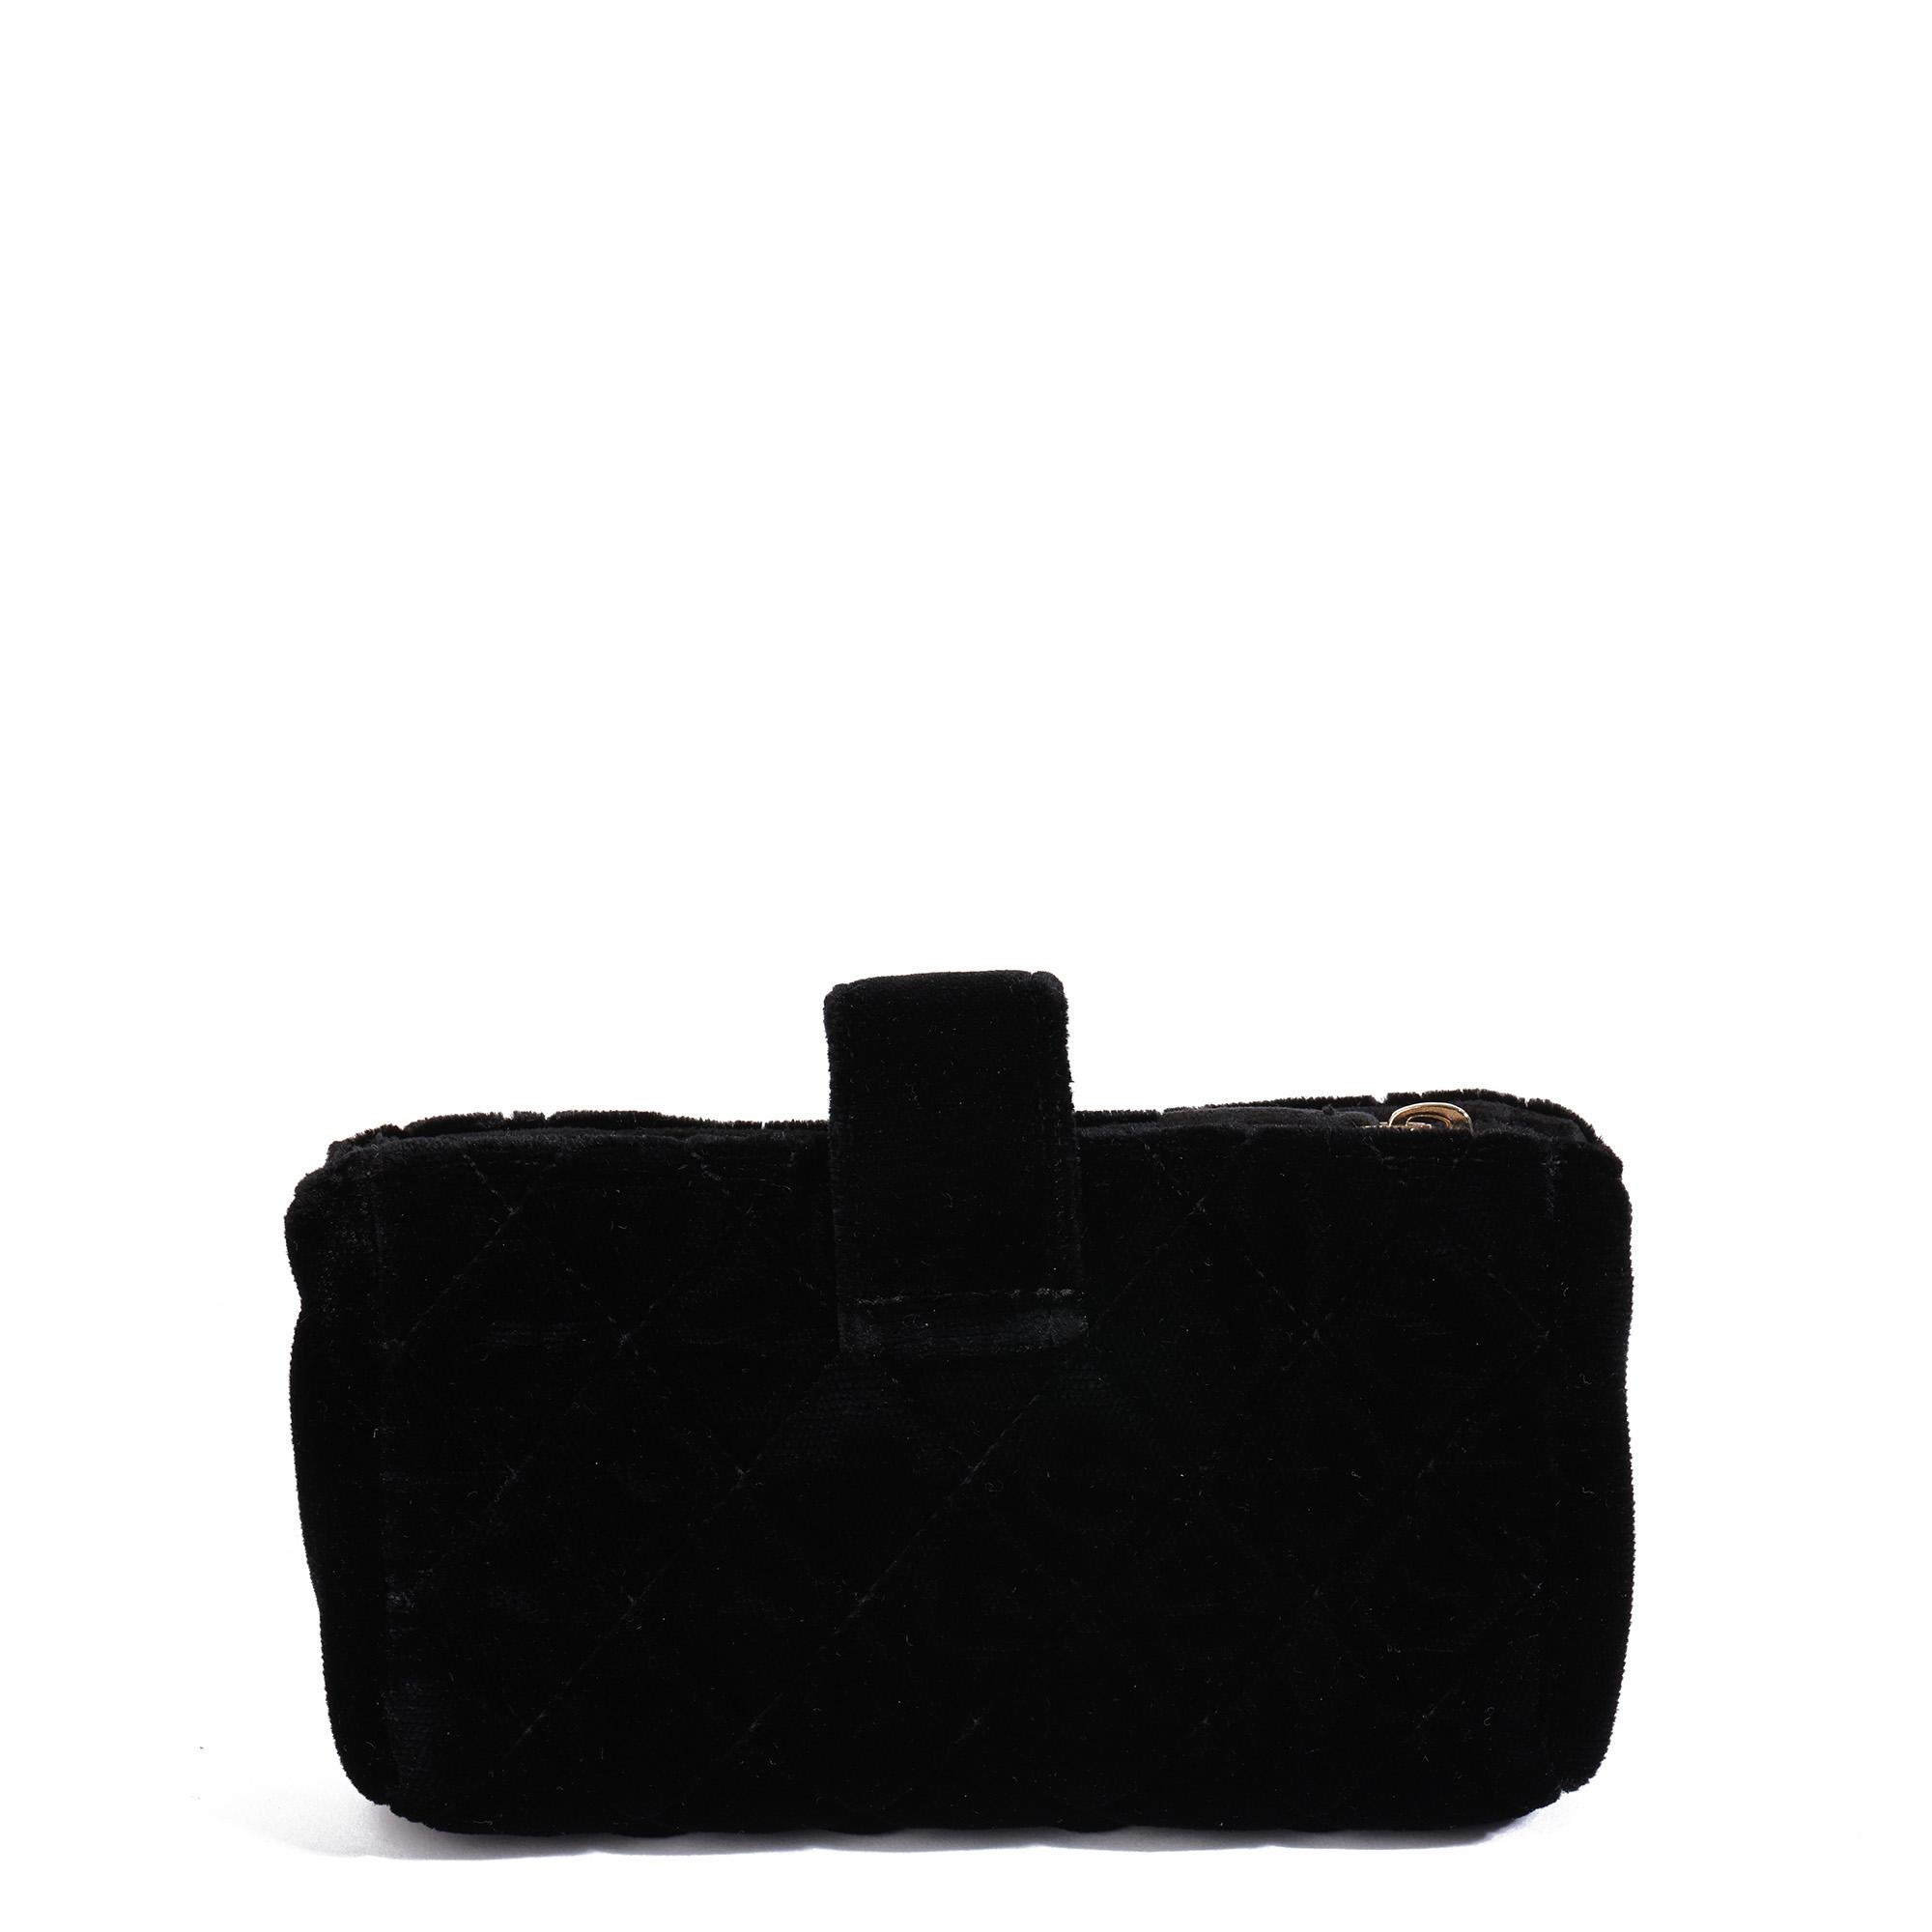 Black Chanel BLACK QUILTED VELVET LEATHER MINI POUCH